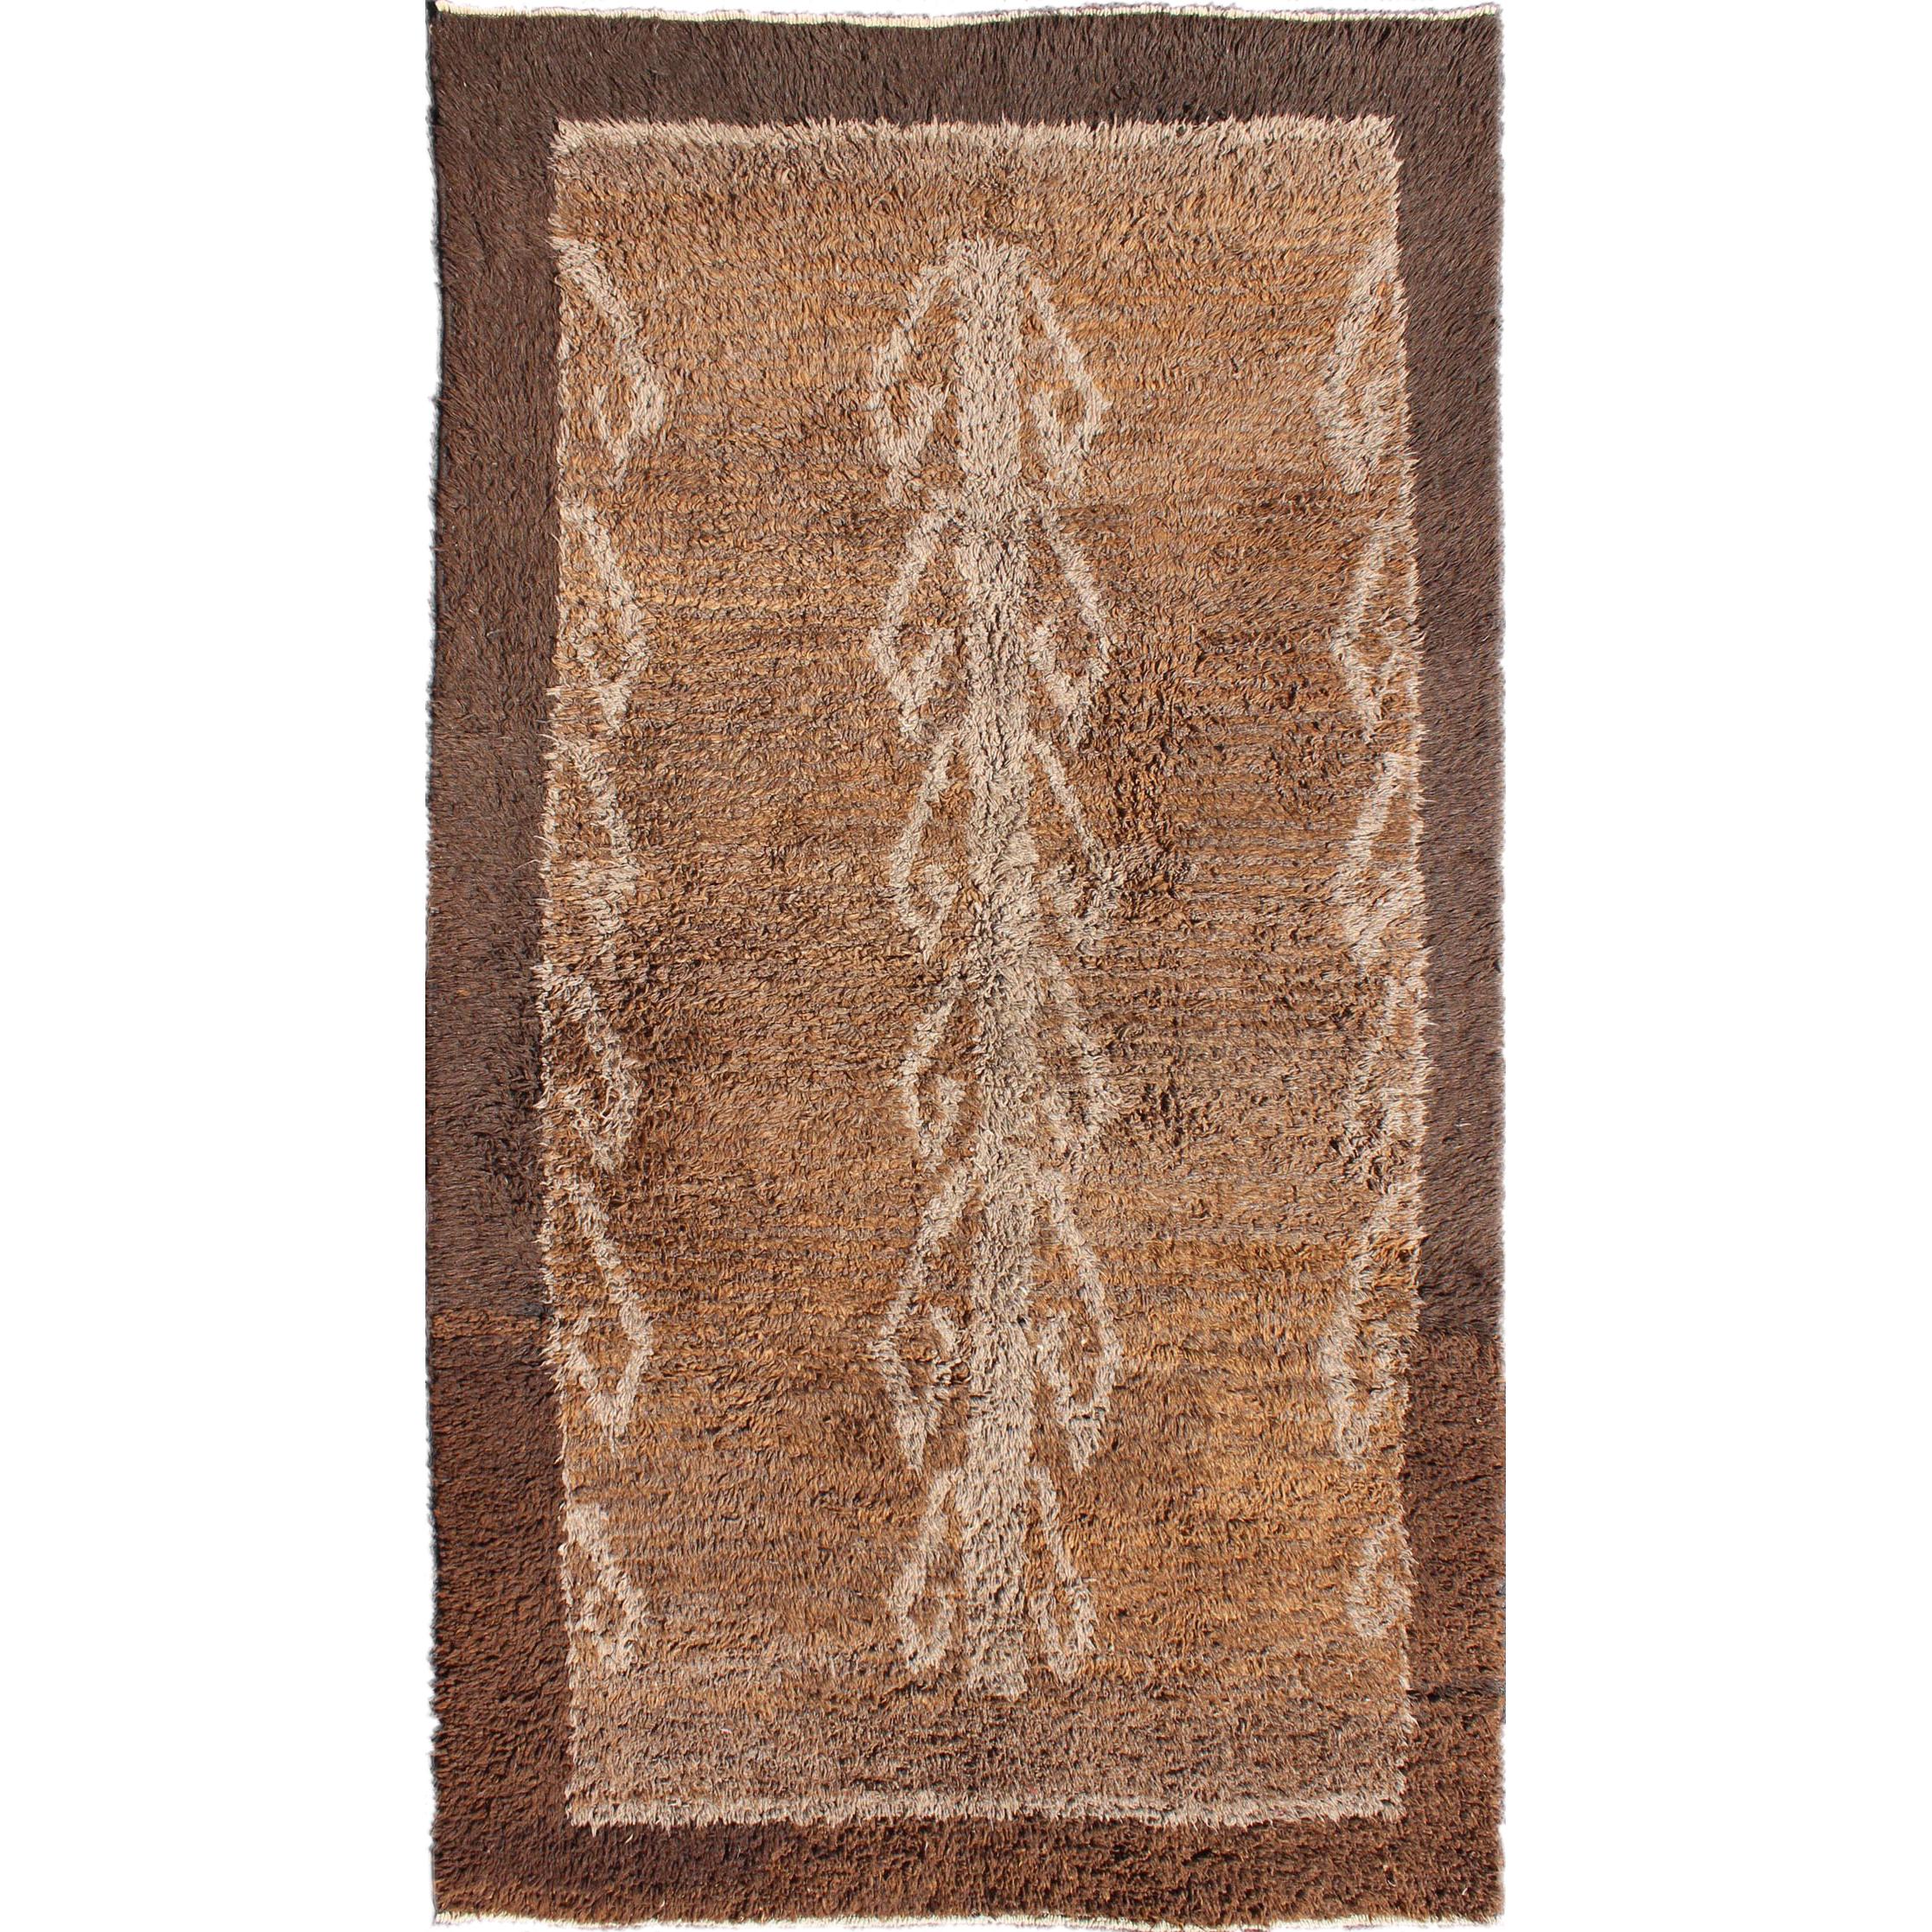 Natural Turkish Tulu Carpet with Vertical Tribal Design in Shades of Brown For Sale